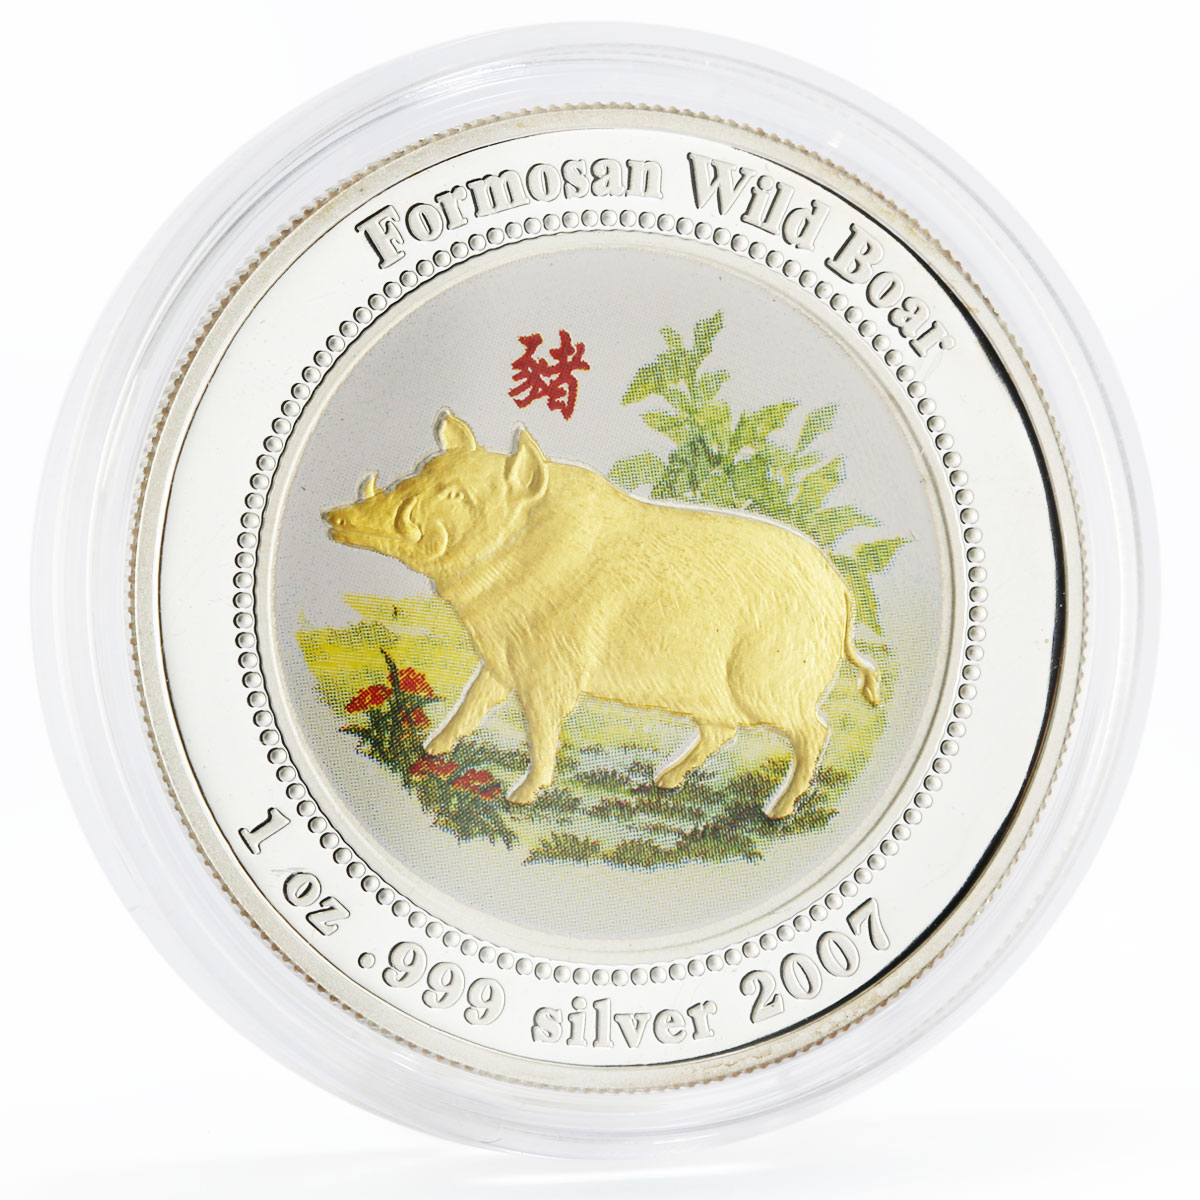 Fiji 2 dollars Year of the Pig series Formosan Wild Boar silver coin 2007